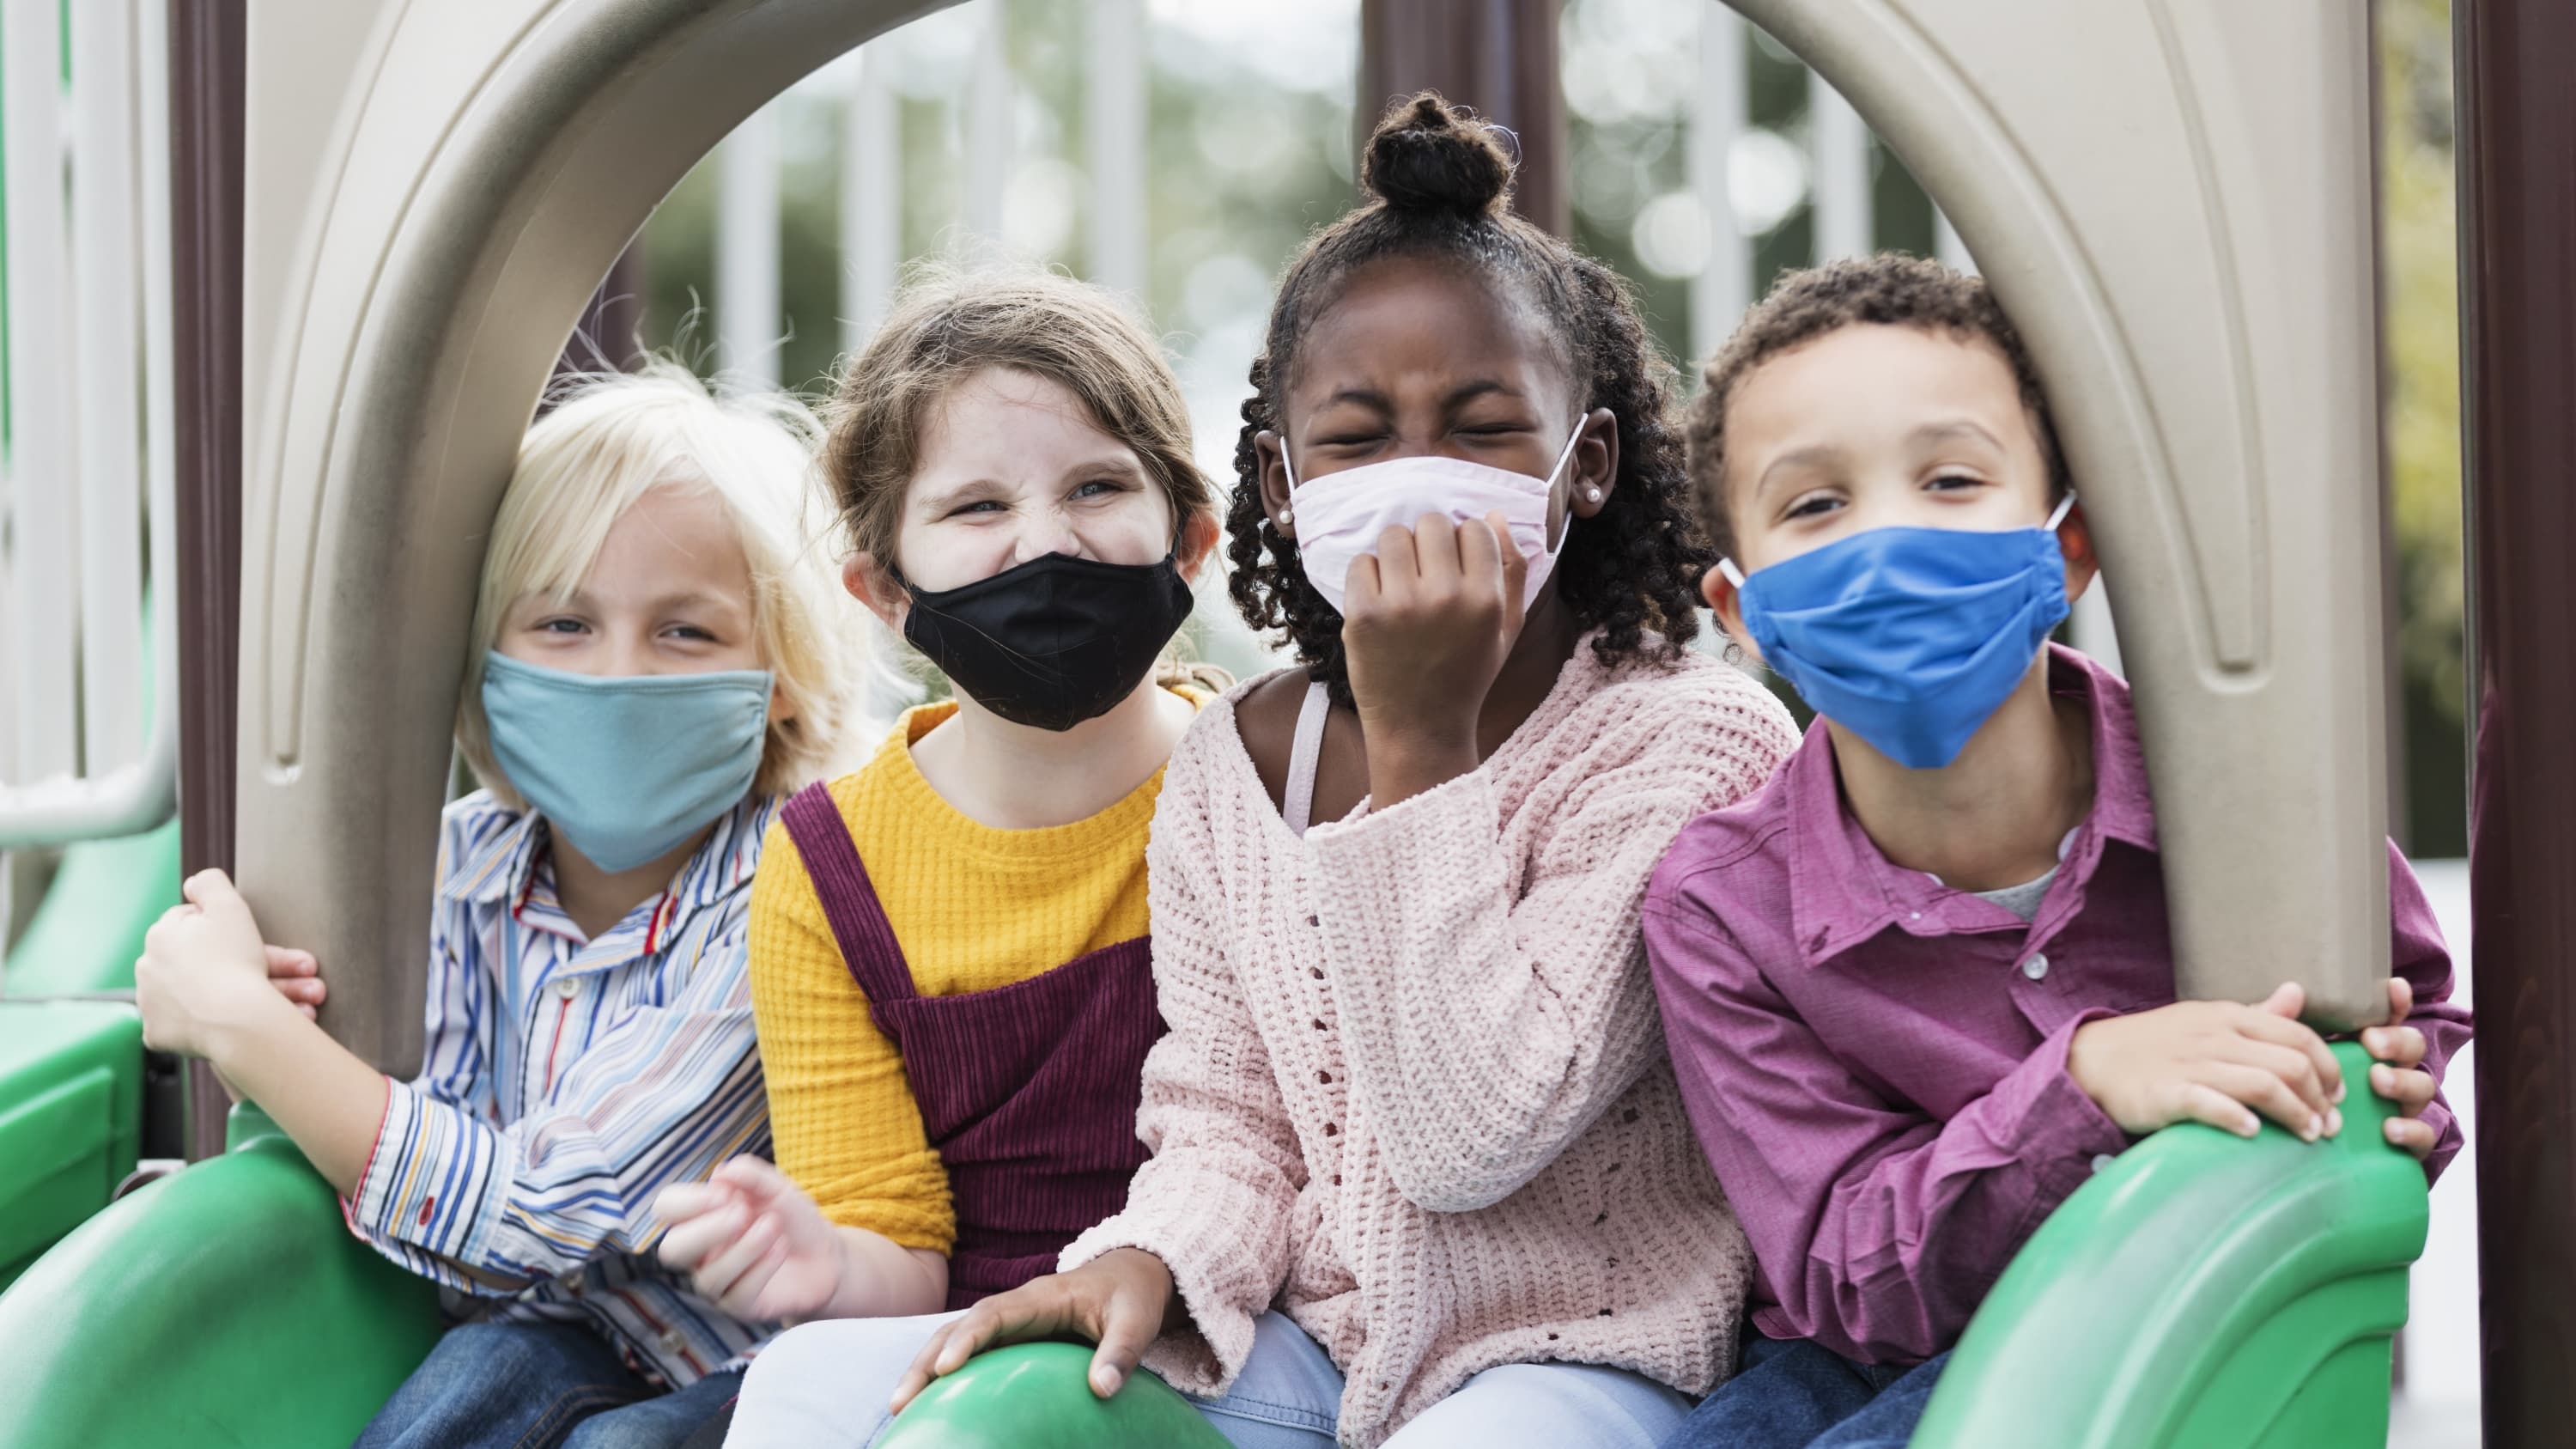 masked kids in a playground who might benefit from COVID-19 vaccine clinical trials